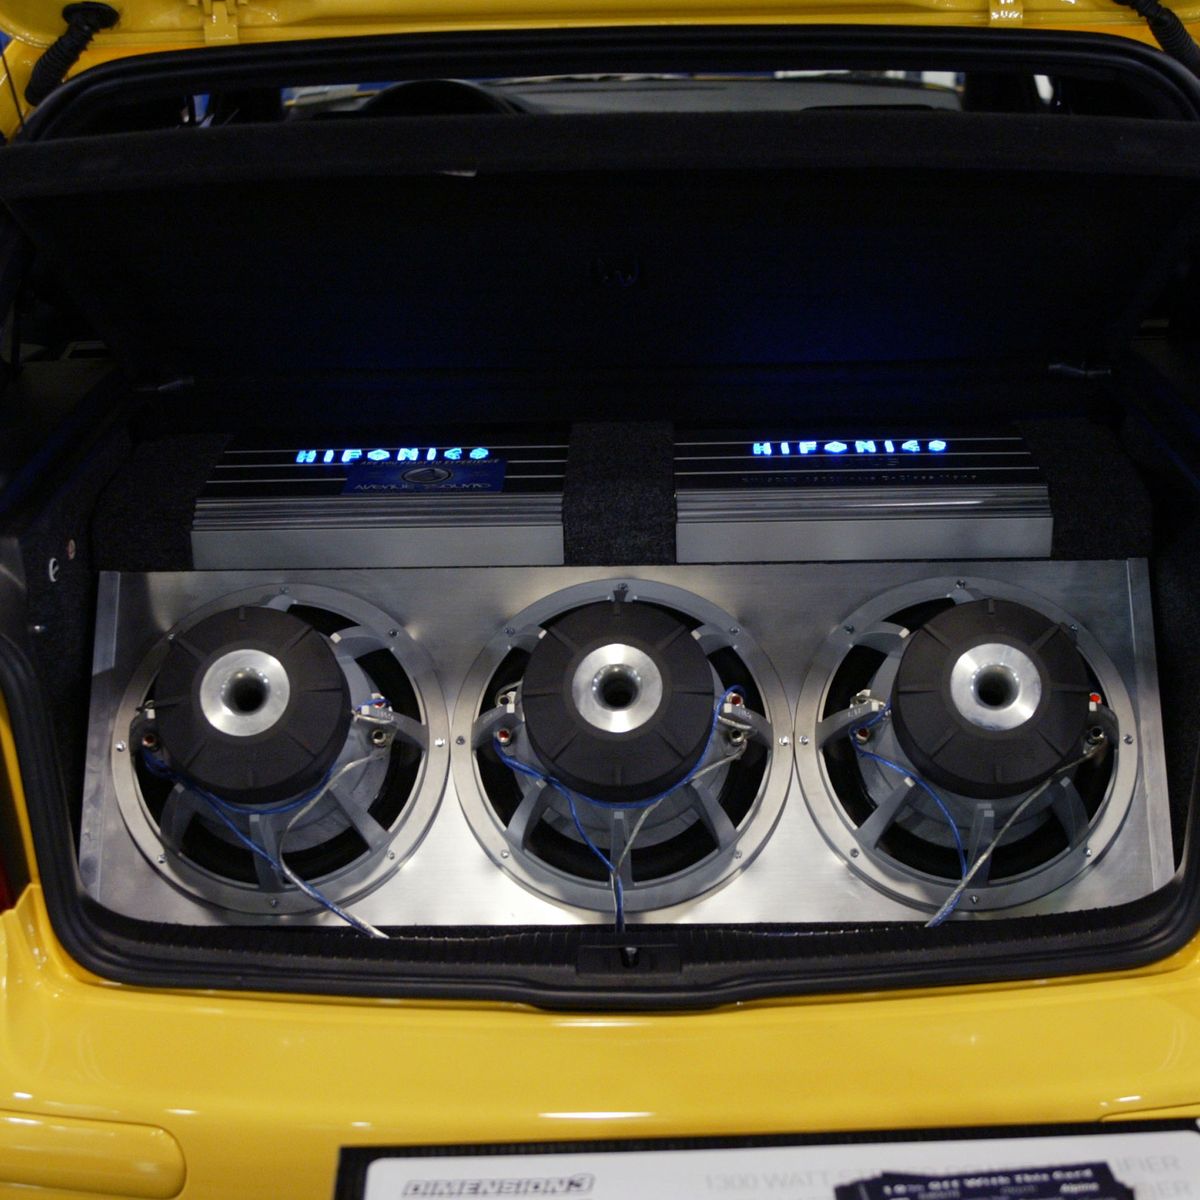 https://hips.hearstapps.com/hmg-prod/images/subwoofers-at-the-power-105-1-ll-cool-j-present-hip-hop-car-news-photo-1639761288.jpg?crop=0.66867xw:1xh;center,top&resize=1200:*